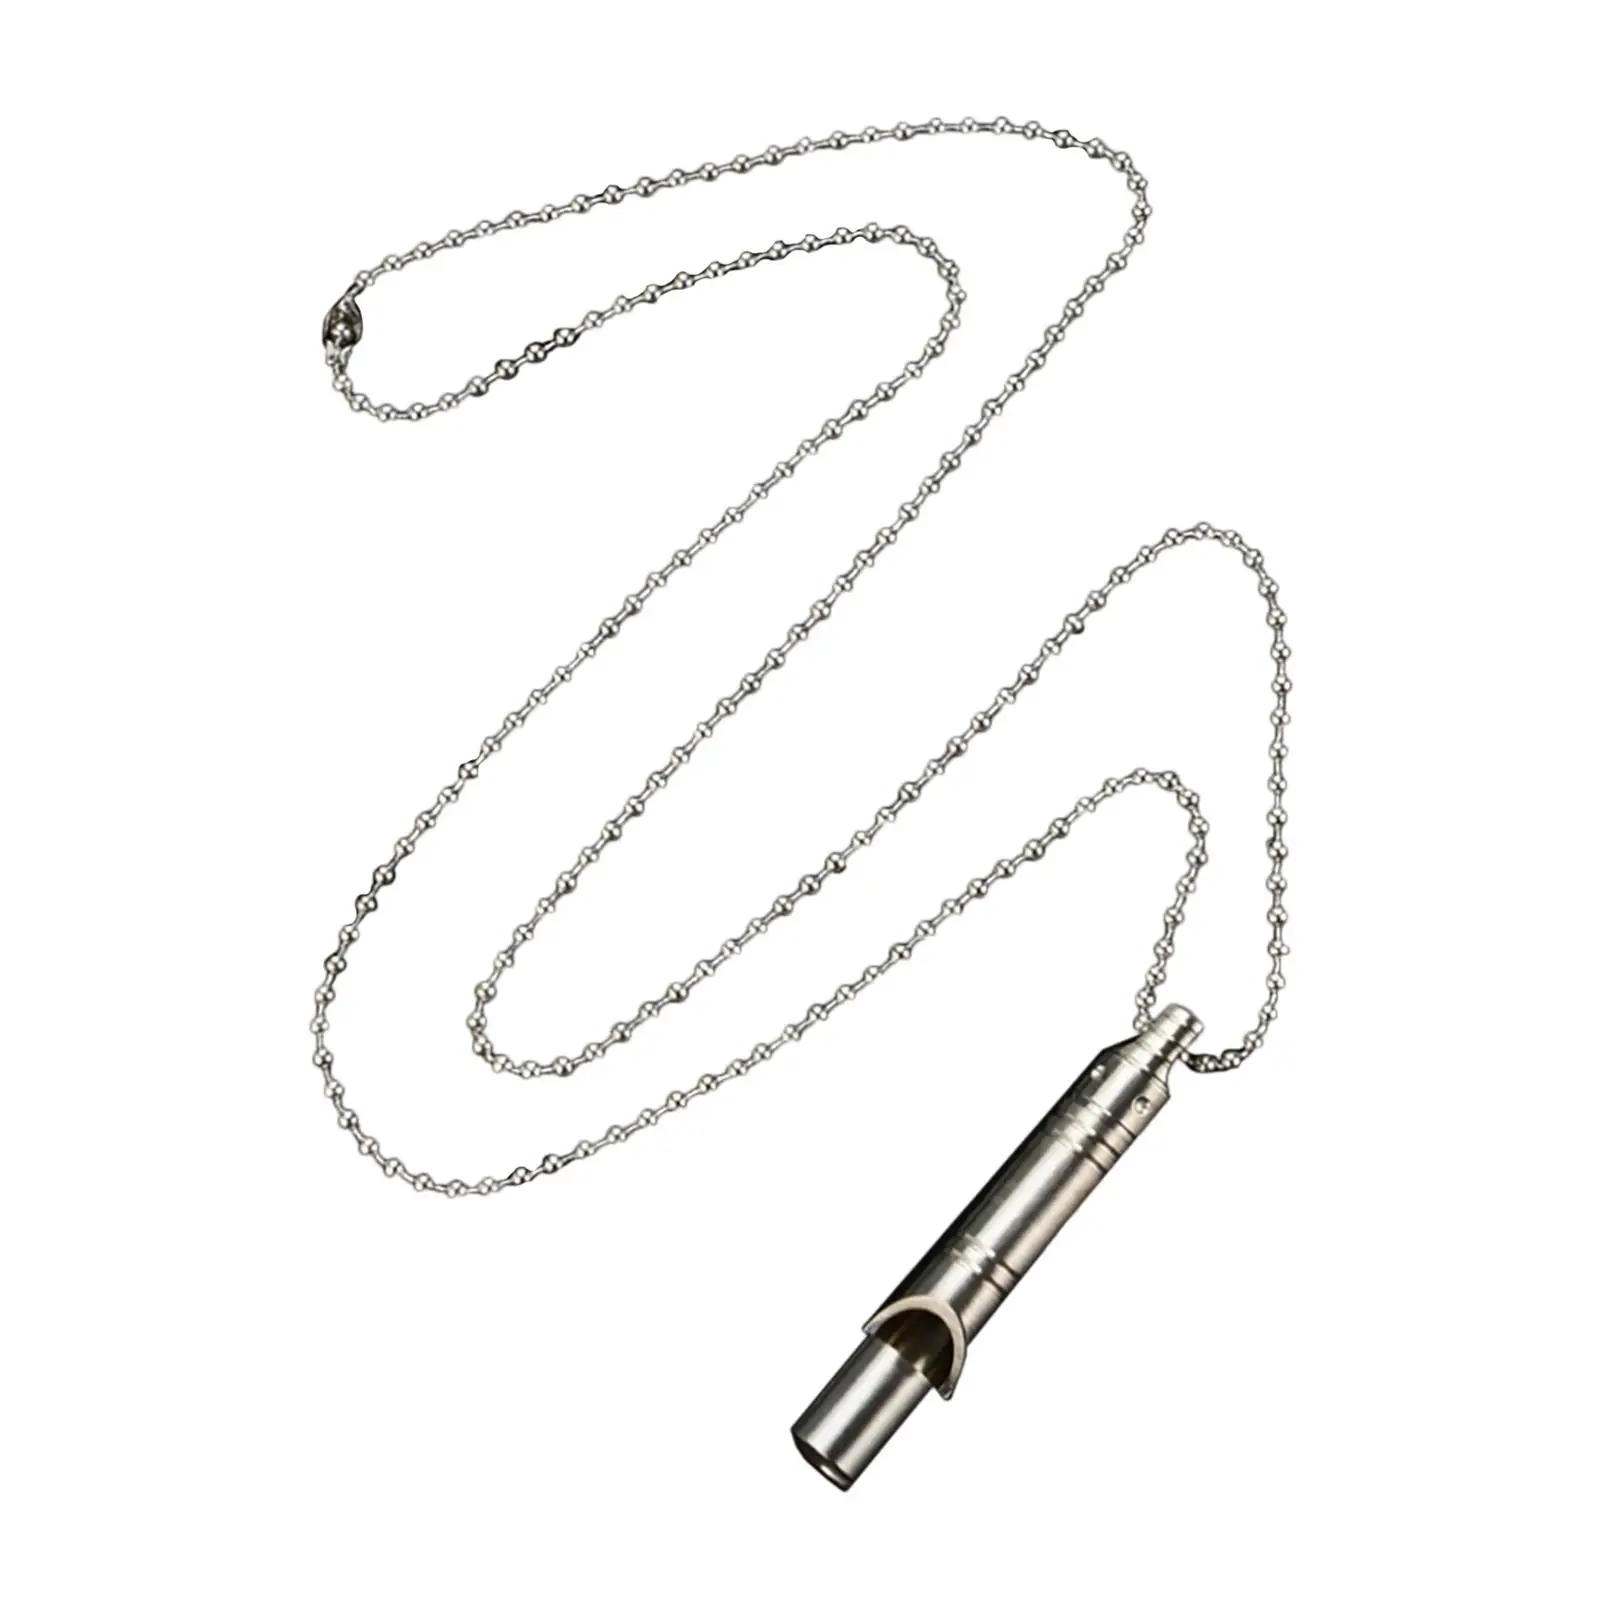 Survival Whistles Dog Training with Long Chain Outdoor Necklace Whistle for Camping Fishing Sports Emergency Boating